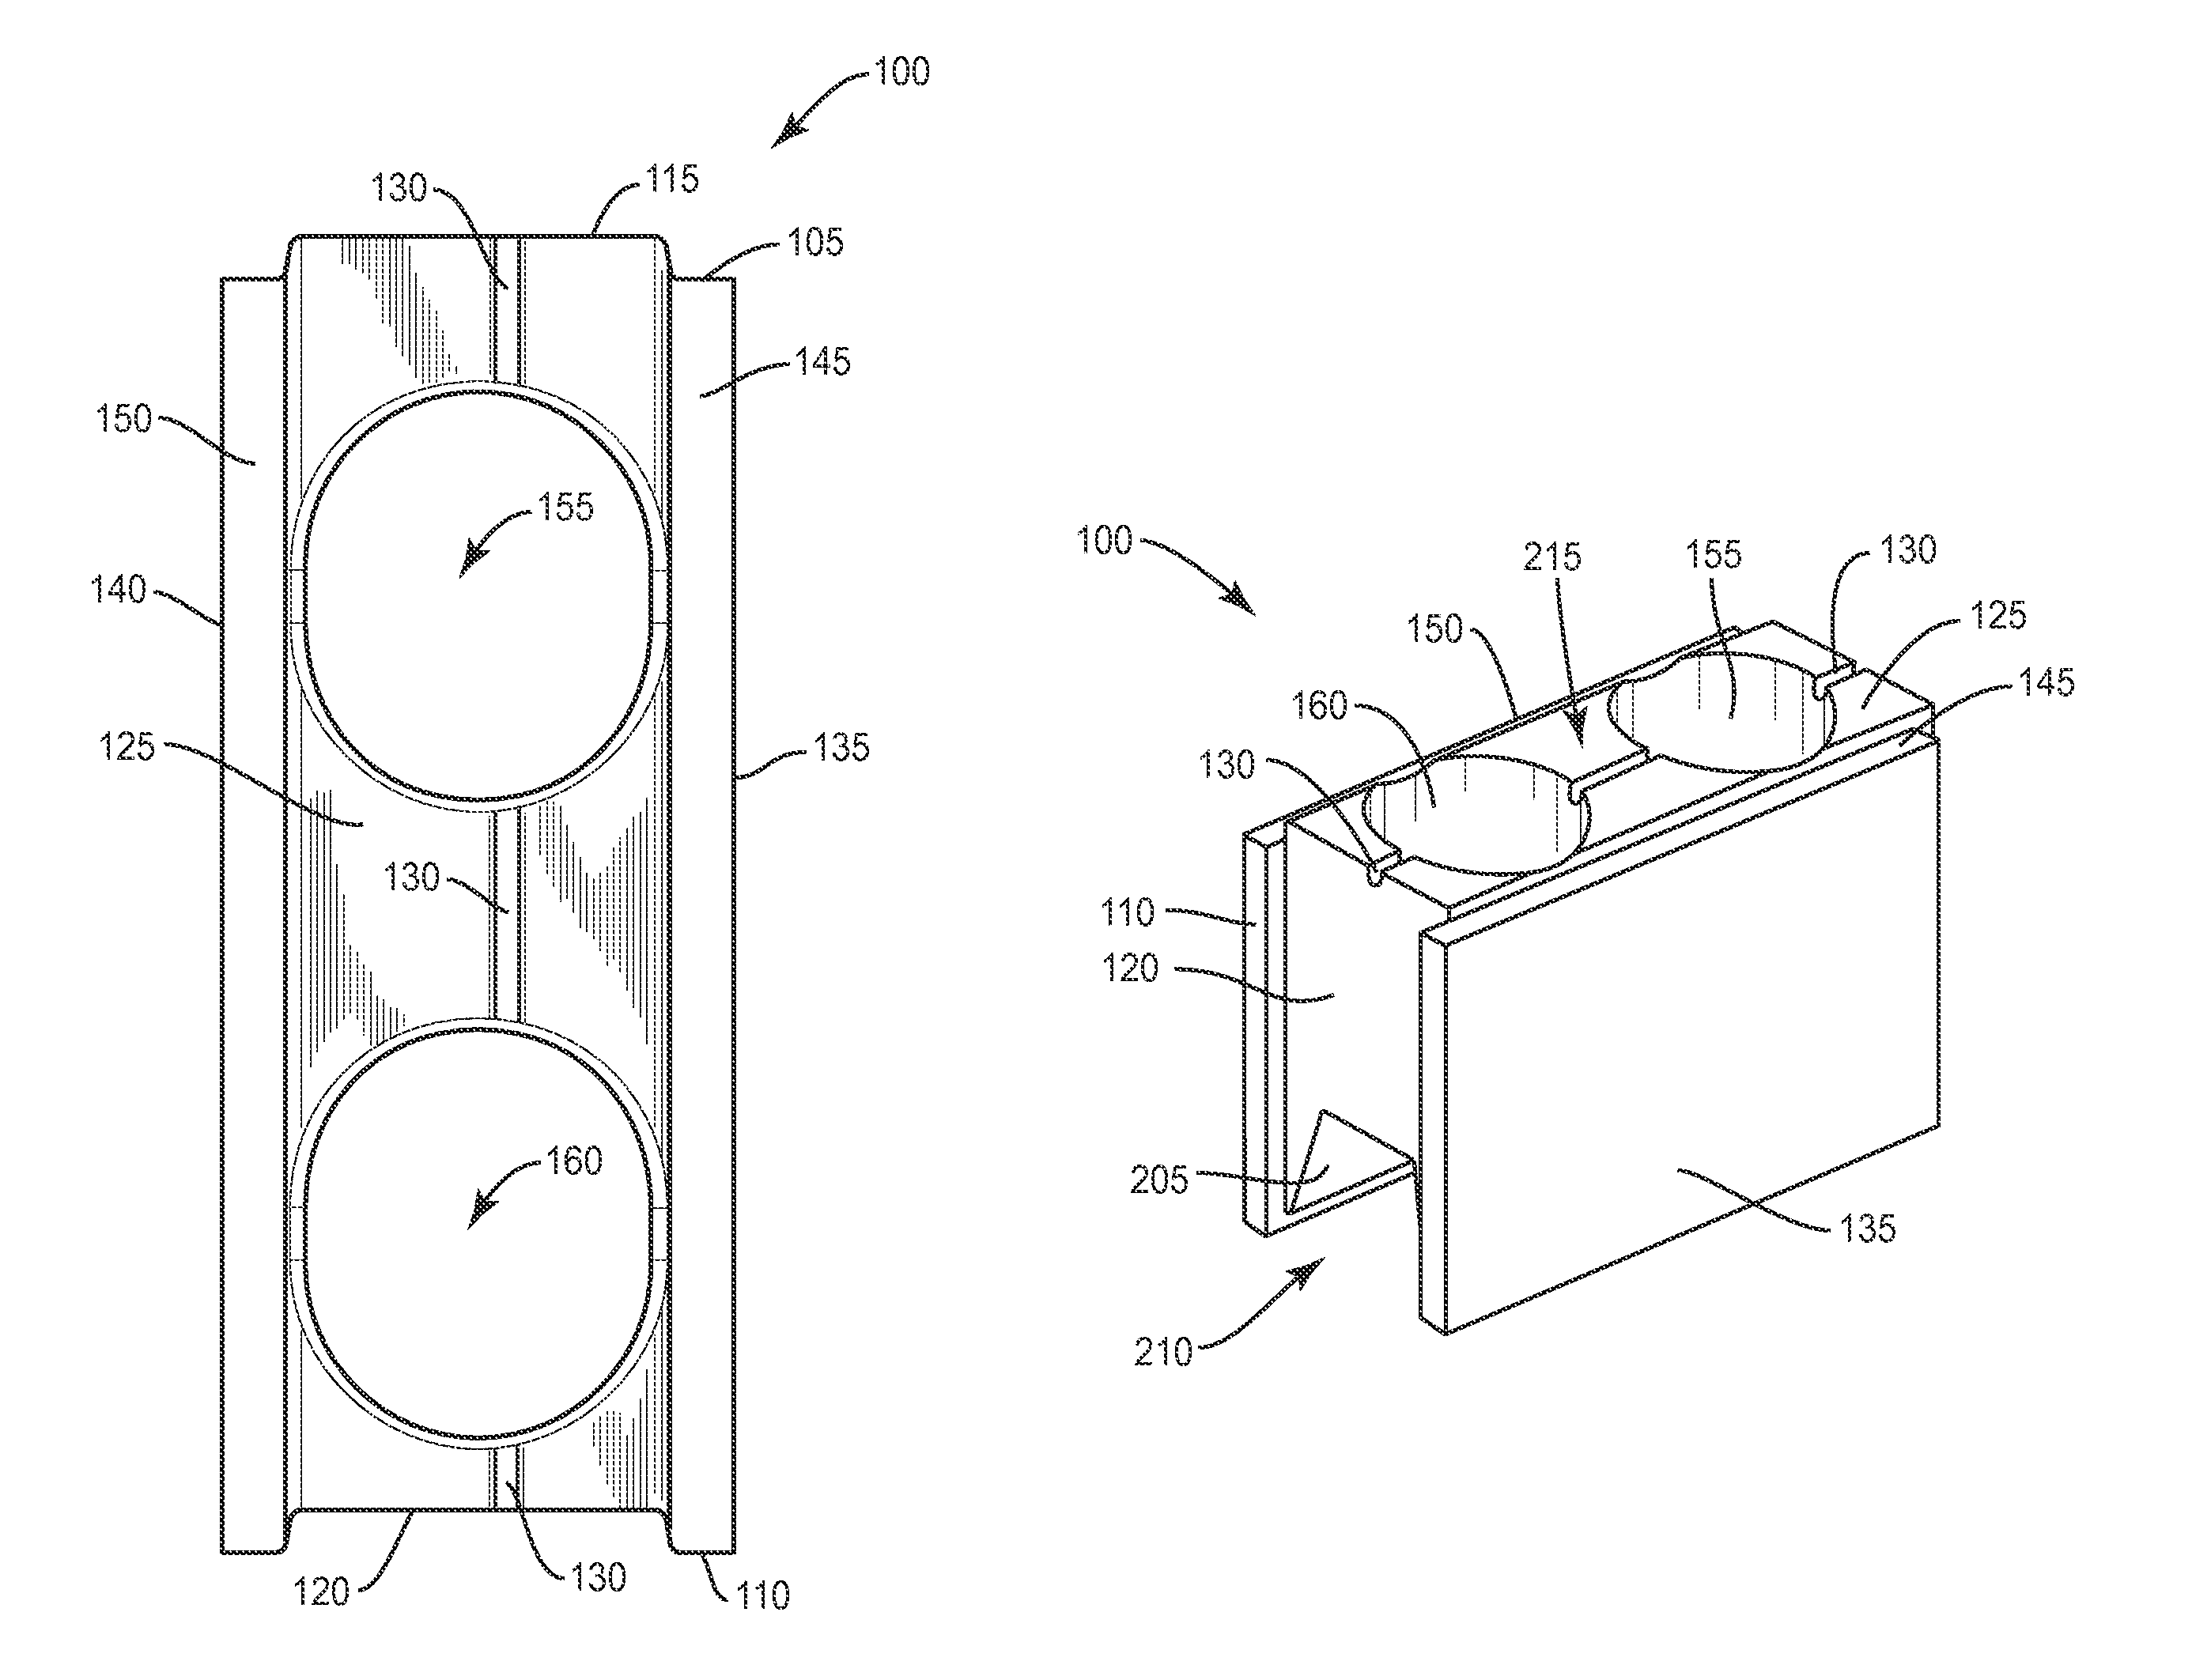 Light-in-weight concrete blocks and method